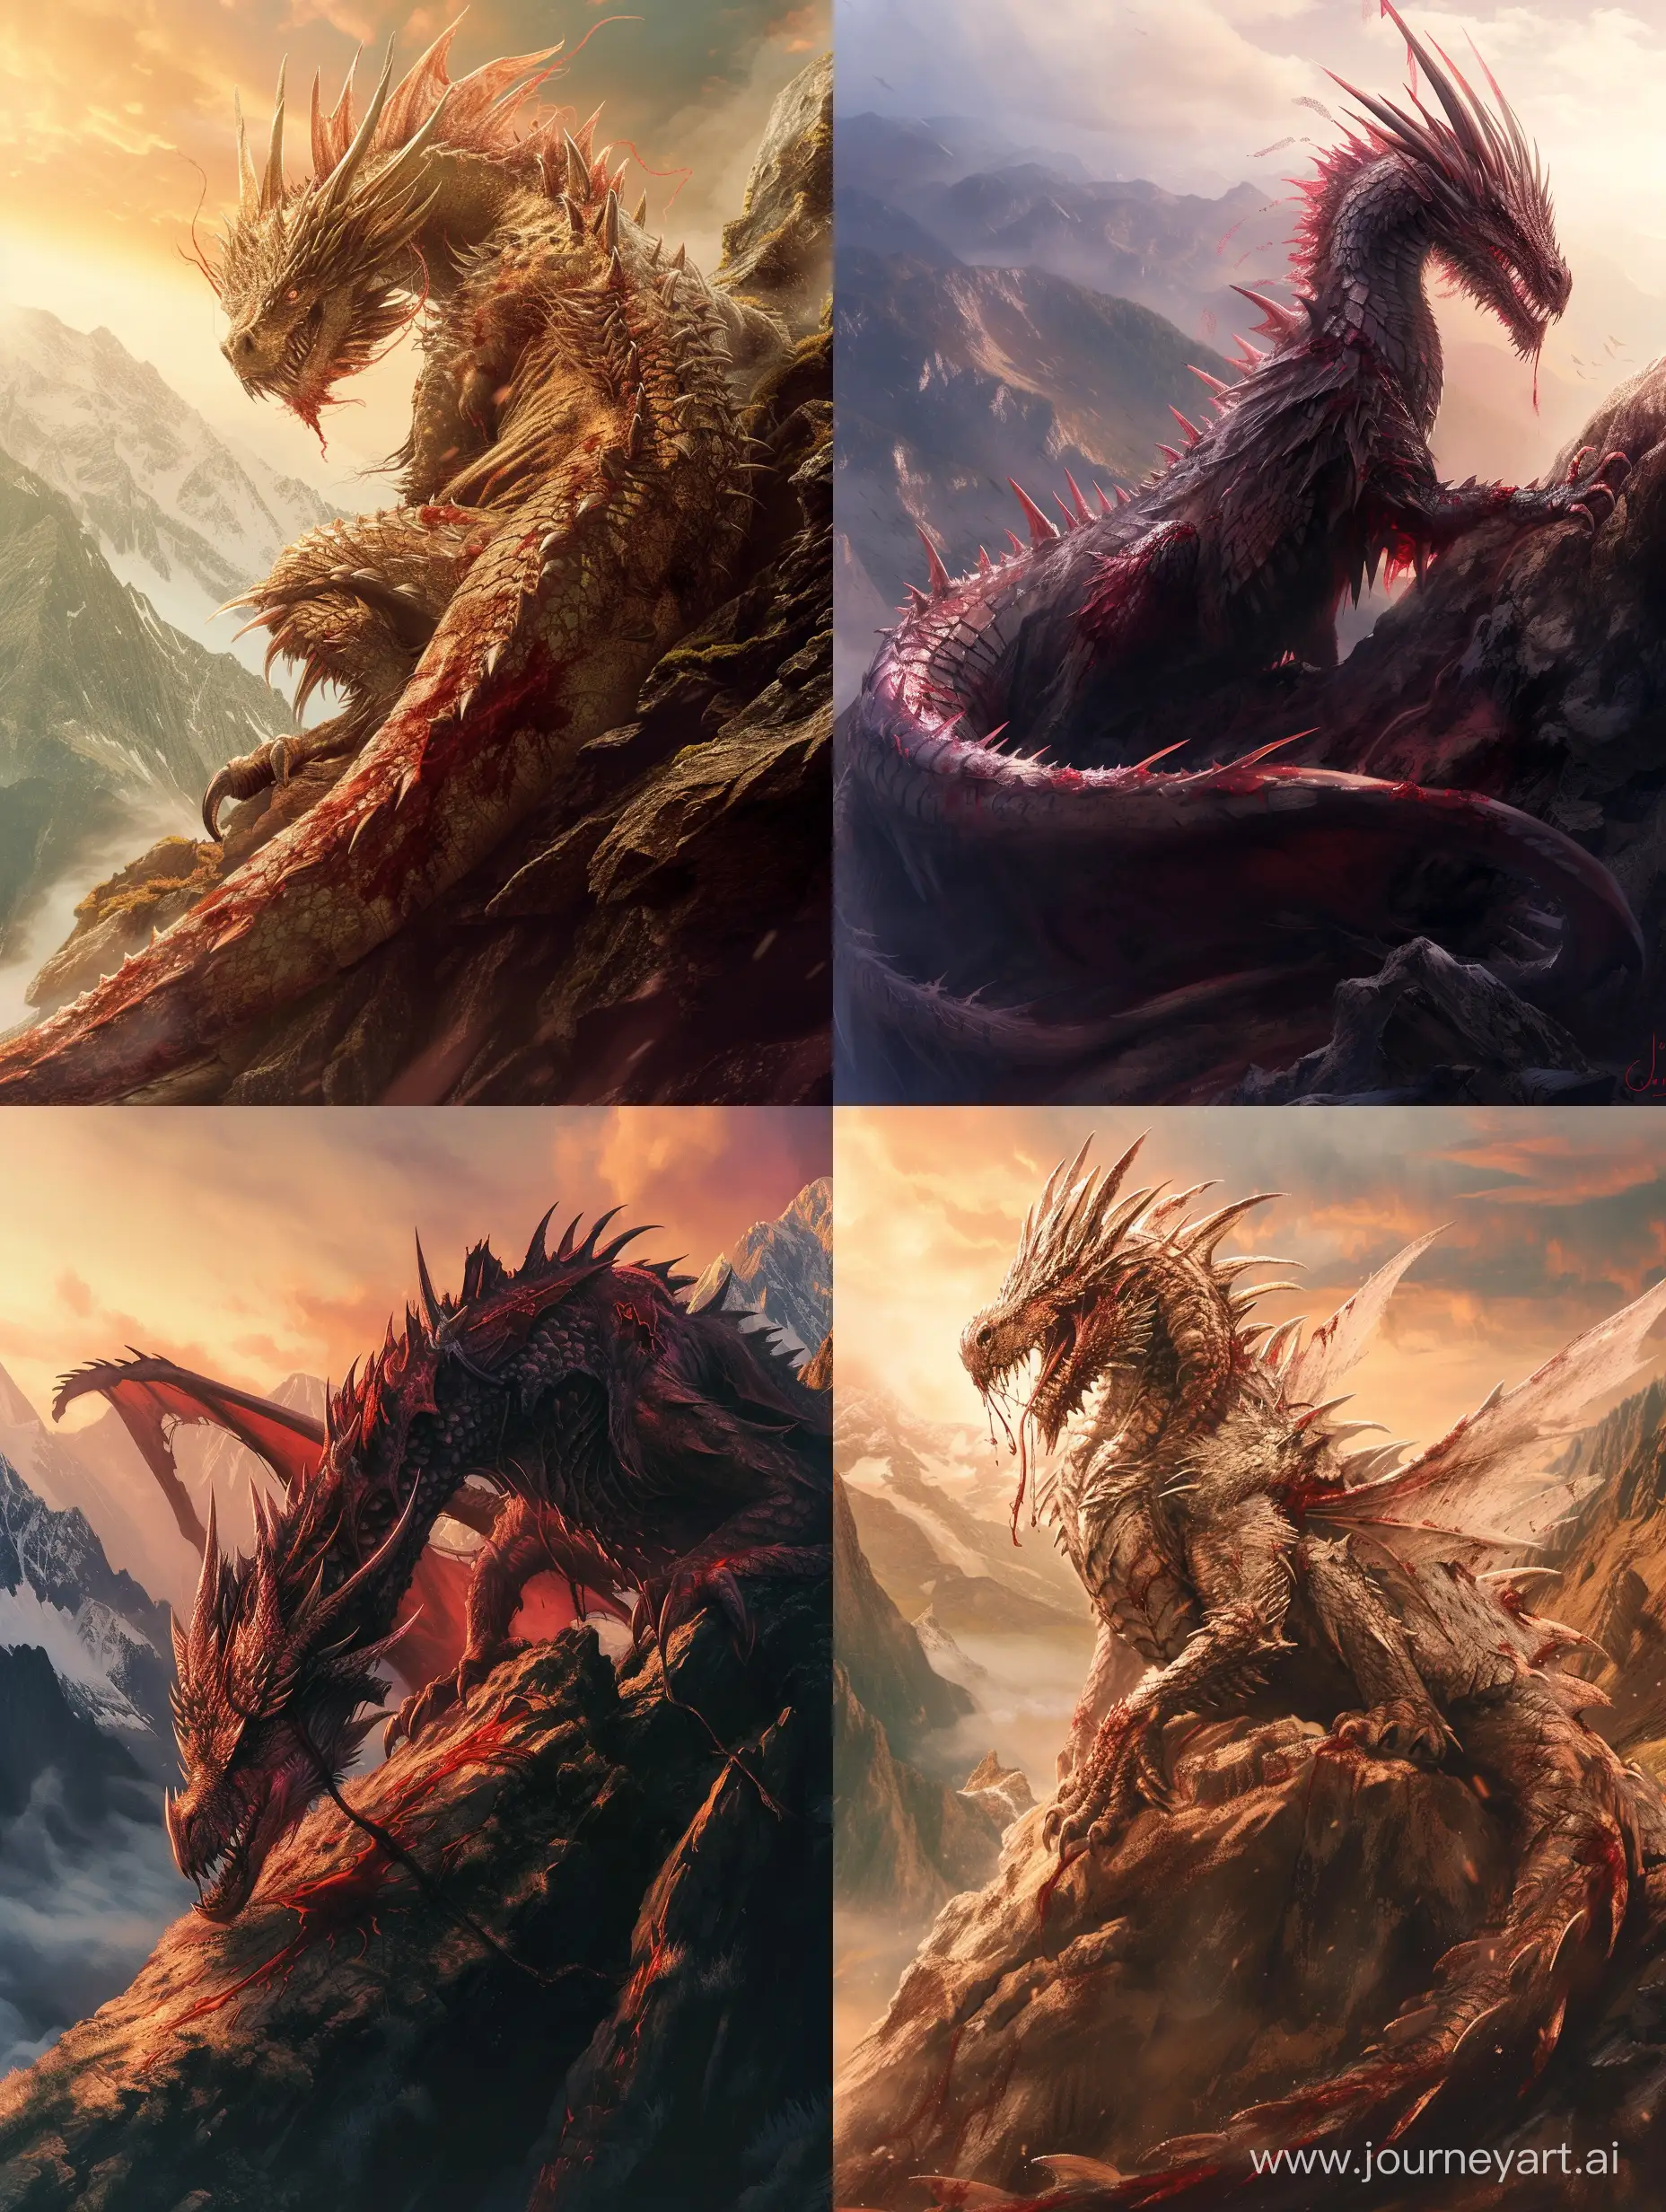 A huge maned dragon with scales and blades on its back on mountain,blood,intricate,incredible detail,warm light,terrifying.